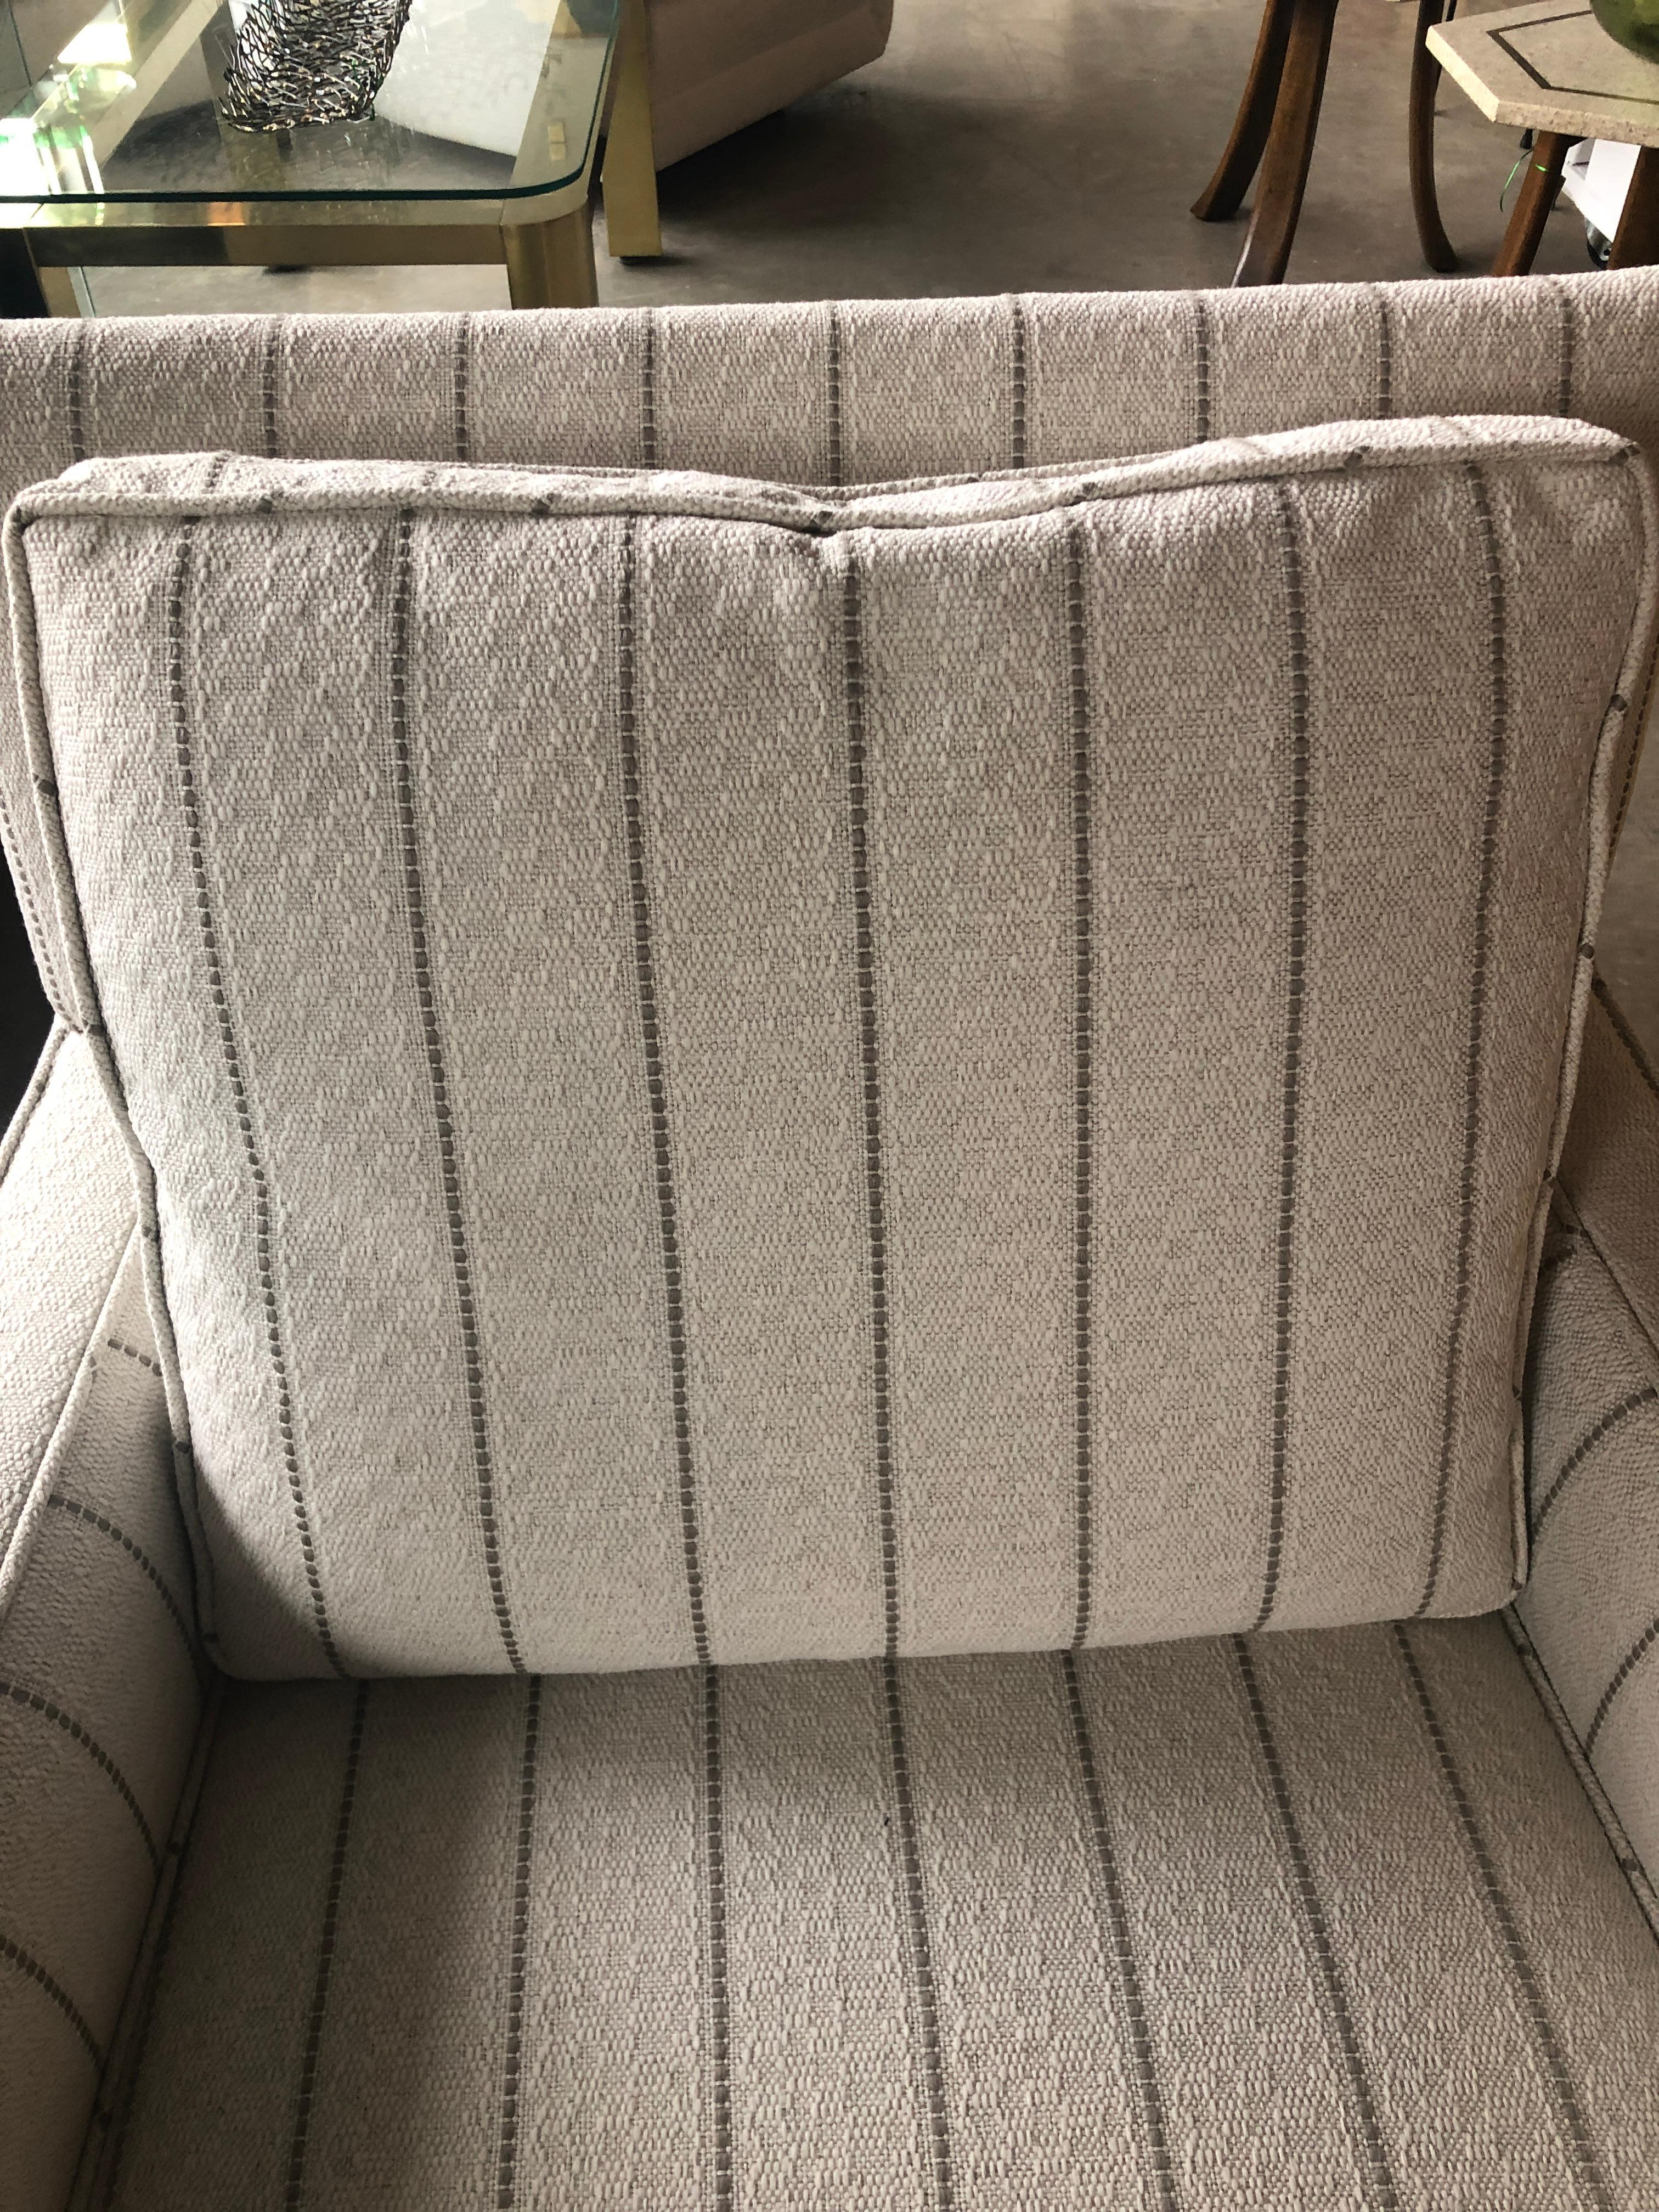 Paul McCobb Arm / Lounge Chair with Stool w/ White & Gray Stripe Upholstery For Sale 8